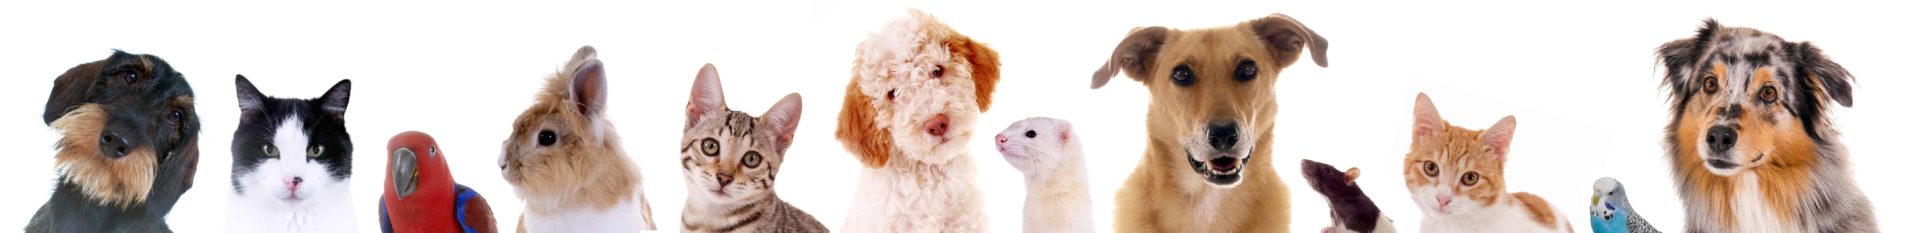 Pet Care Services - Animals at Home